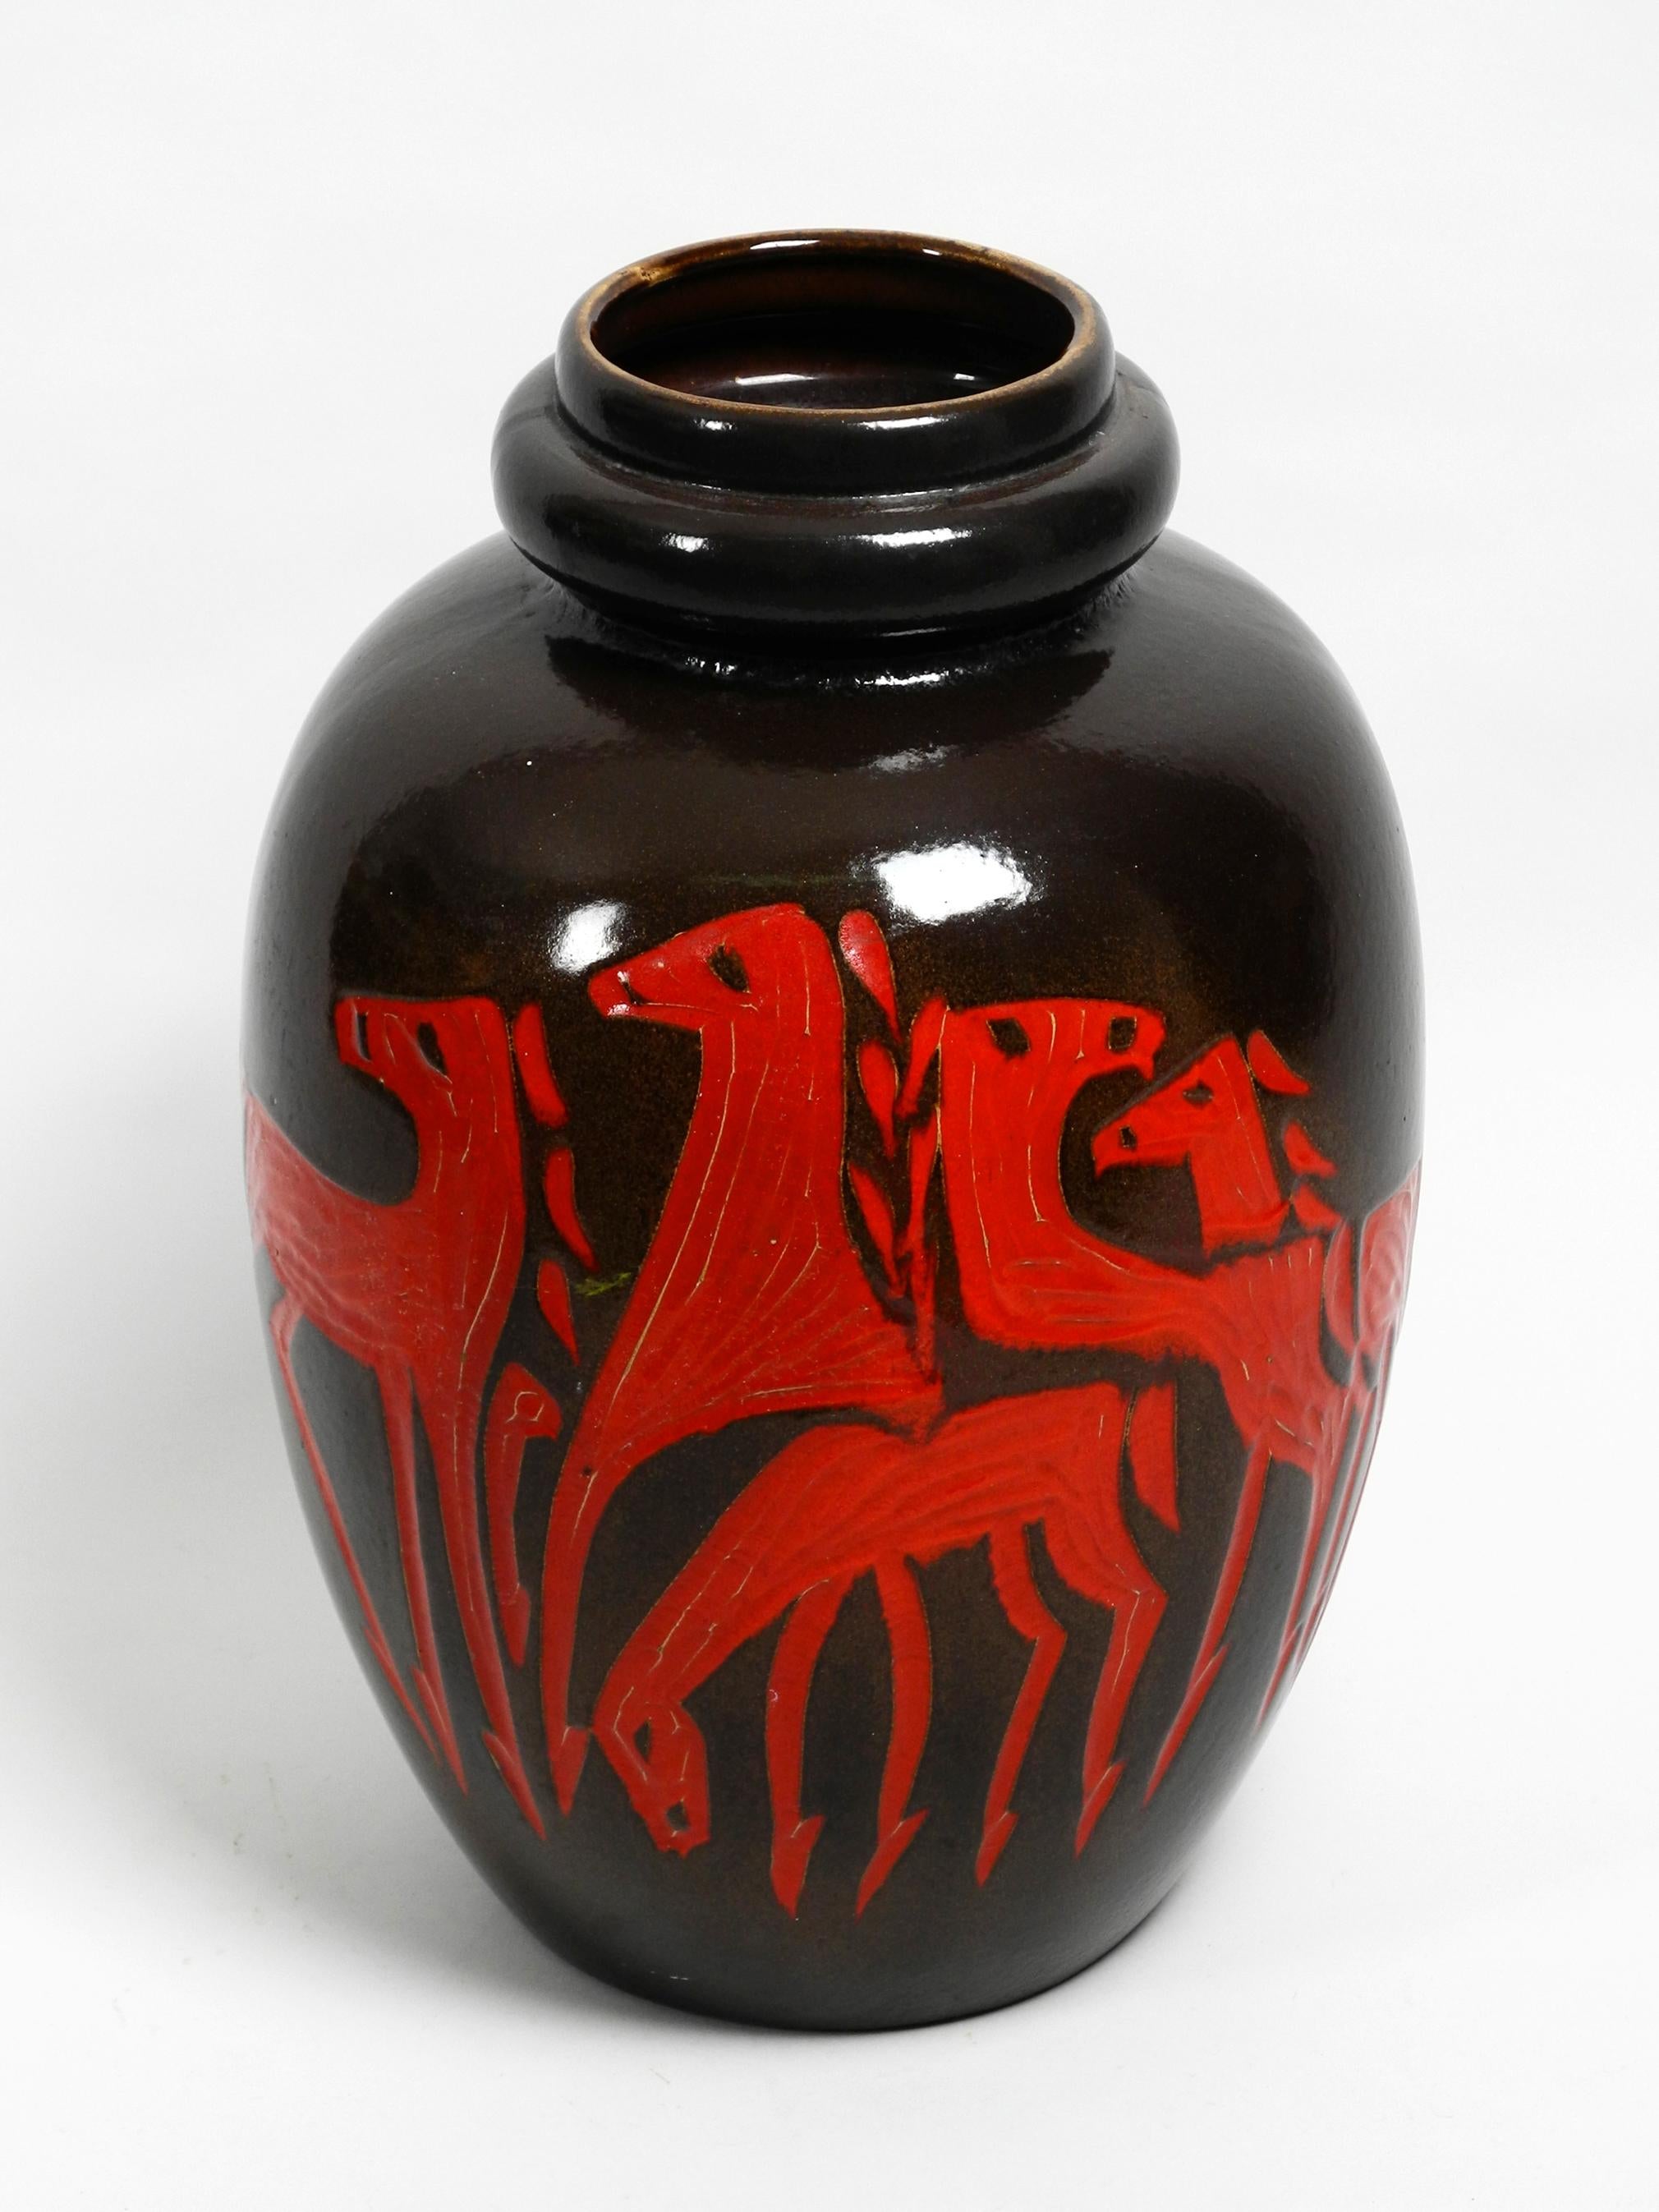 Very nice extra large dark brown ceramic floor vase with red abstract motif with horses. 
Nice high quality minimalistic design.
Very nice patina, the red color on the horses has got some Fine cracks over time. 
No damages to the entire vase. No